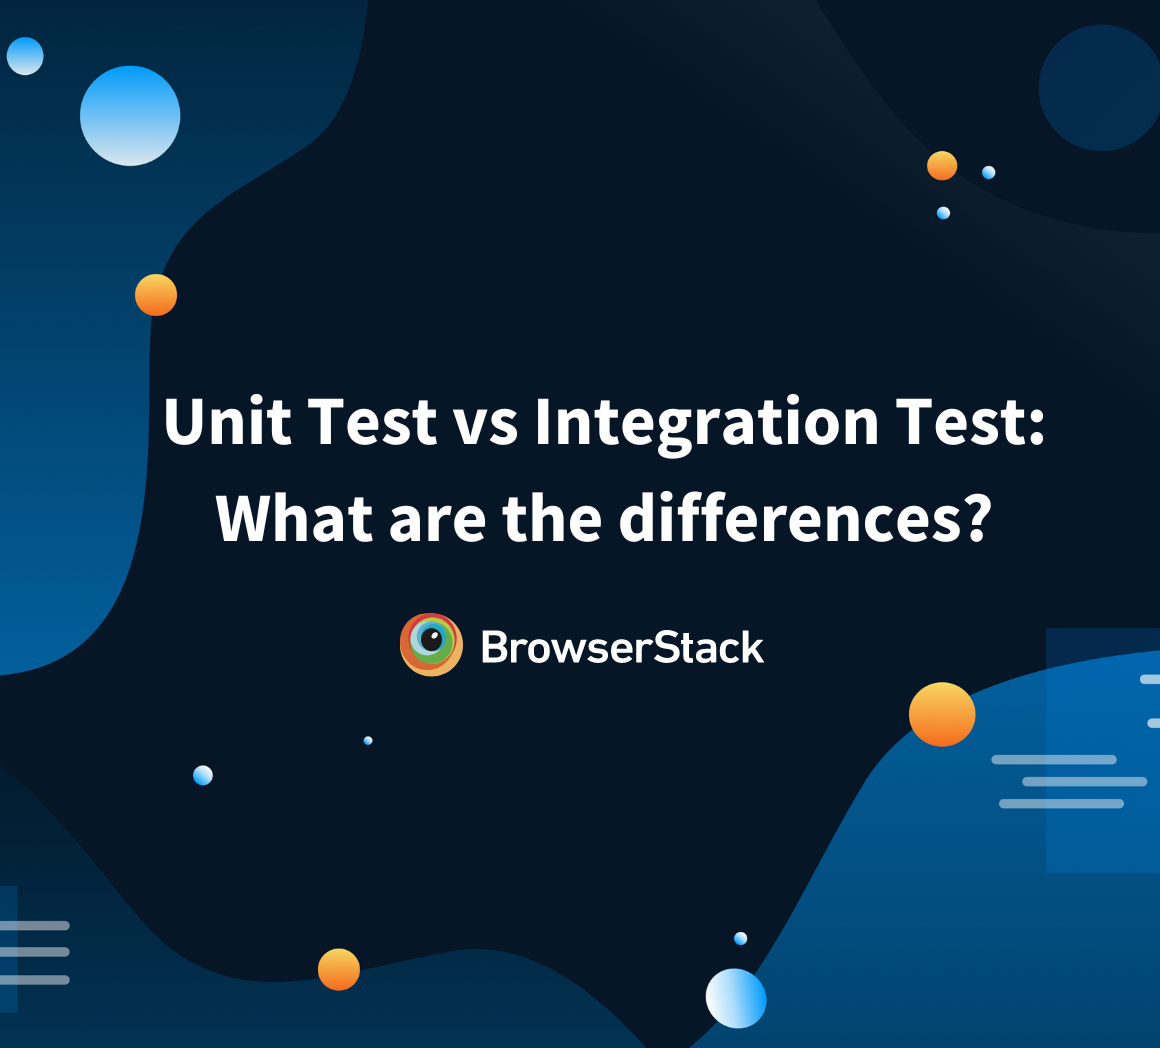 Unit Test vs Integration Test: What are the differences?